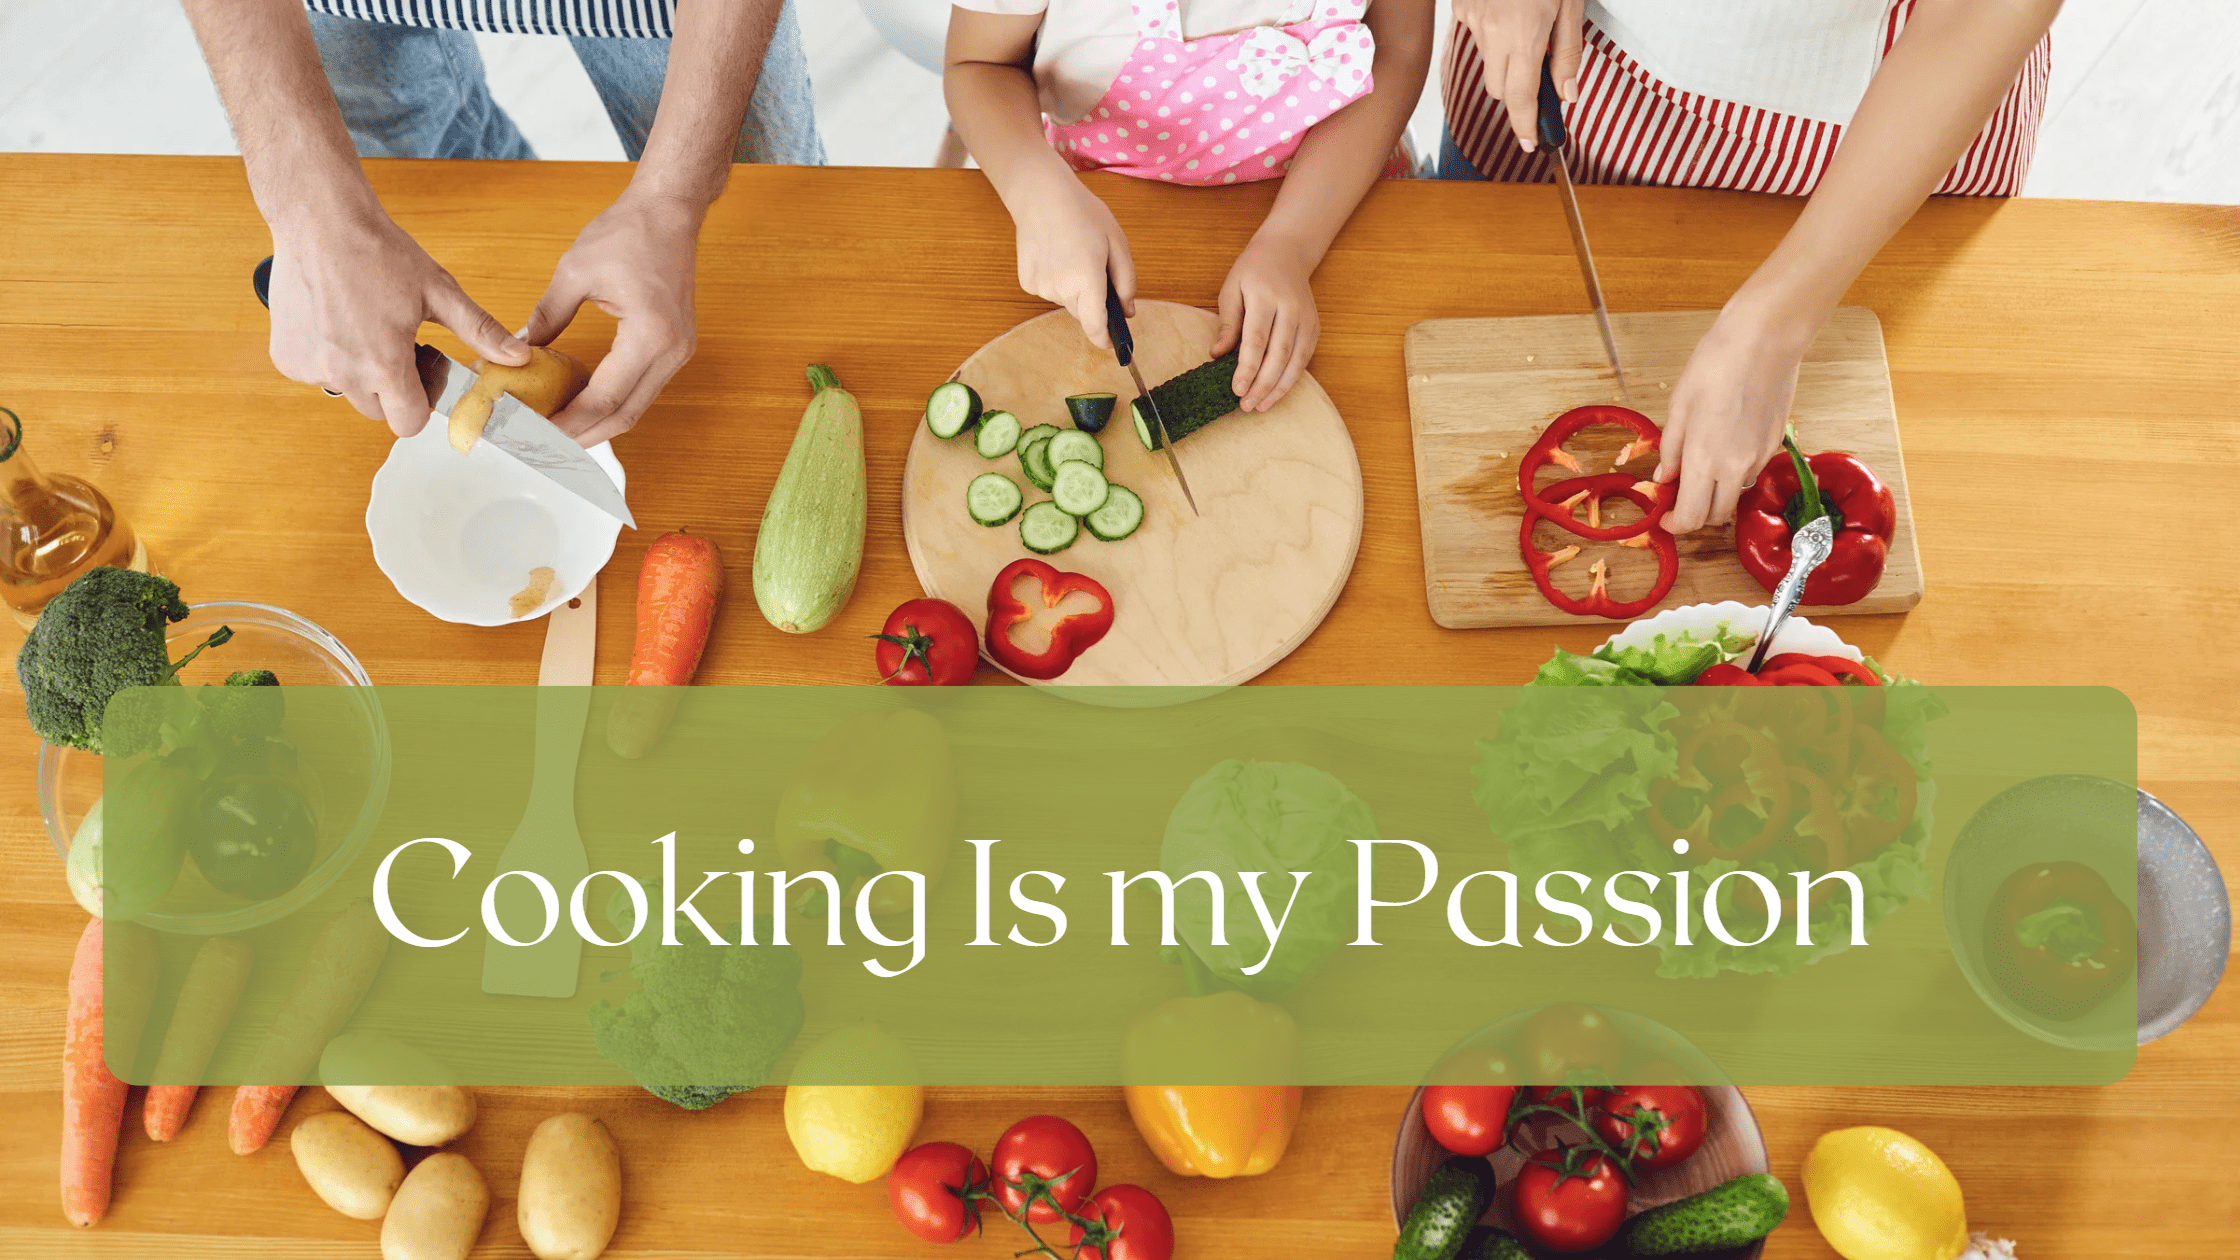 Cooking is My Passion Quotes to Inspire Culinary Creations